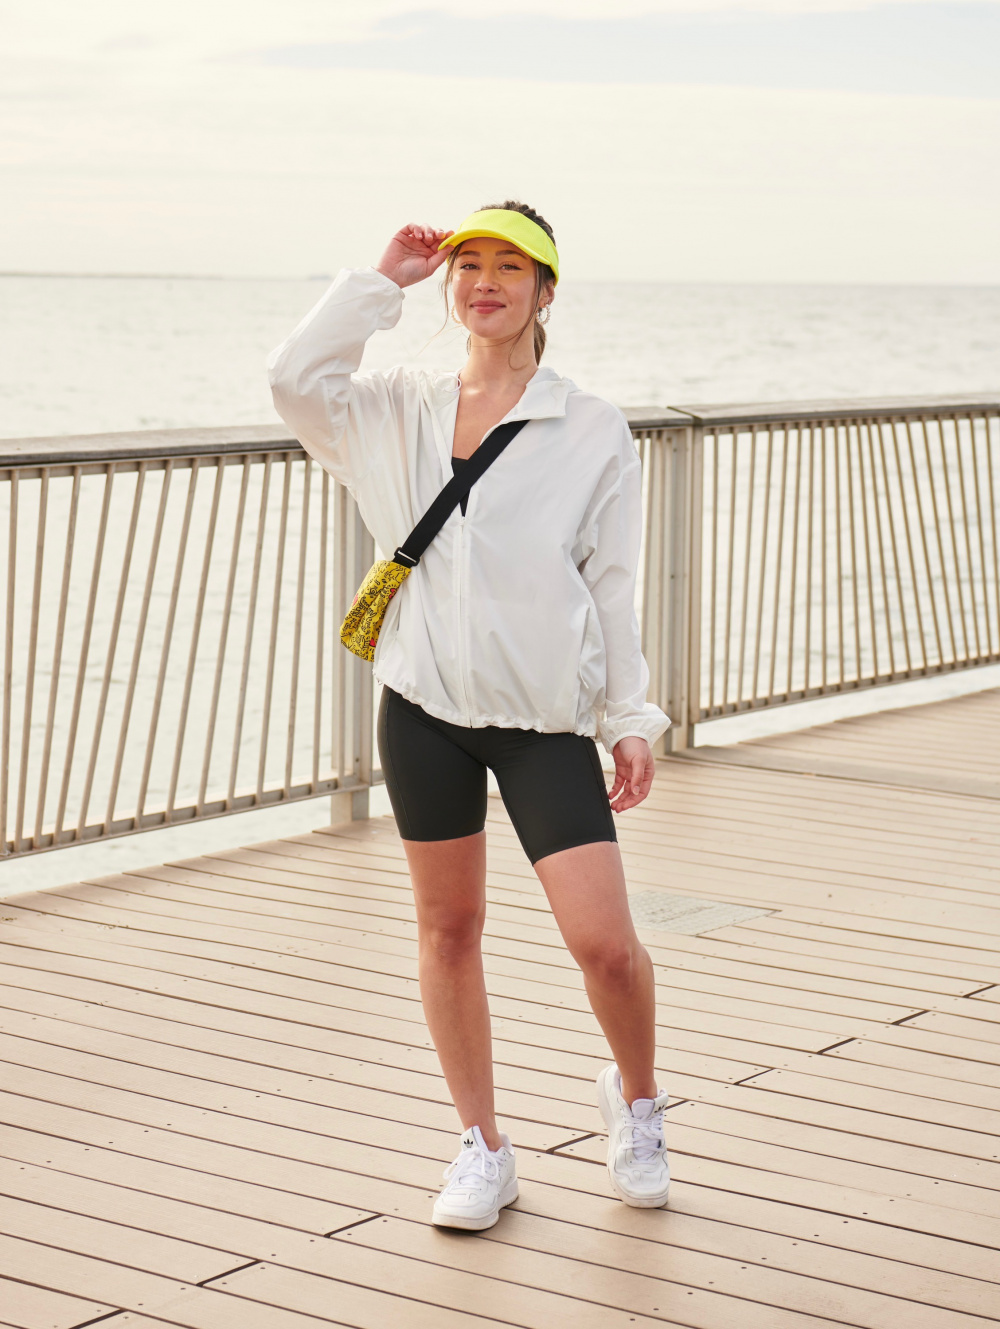 Check styling ideas for「LINEN BLEND JACKET、WIRELESS BRA ACTIVE